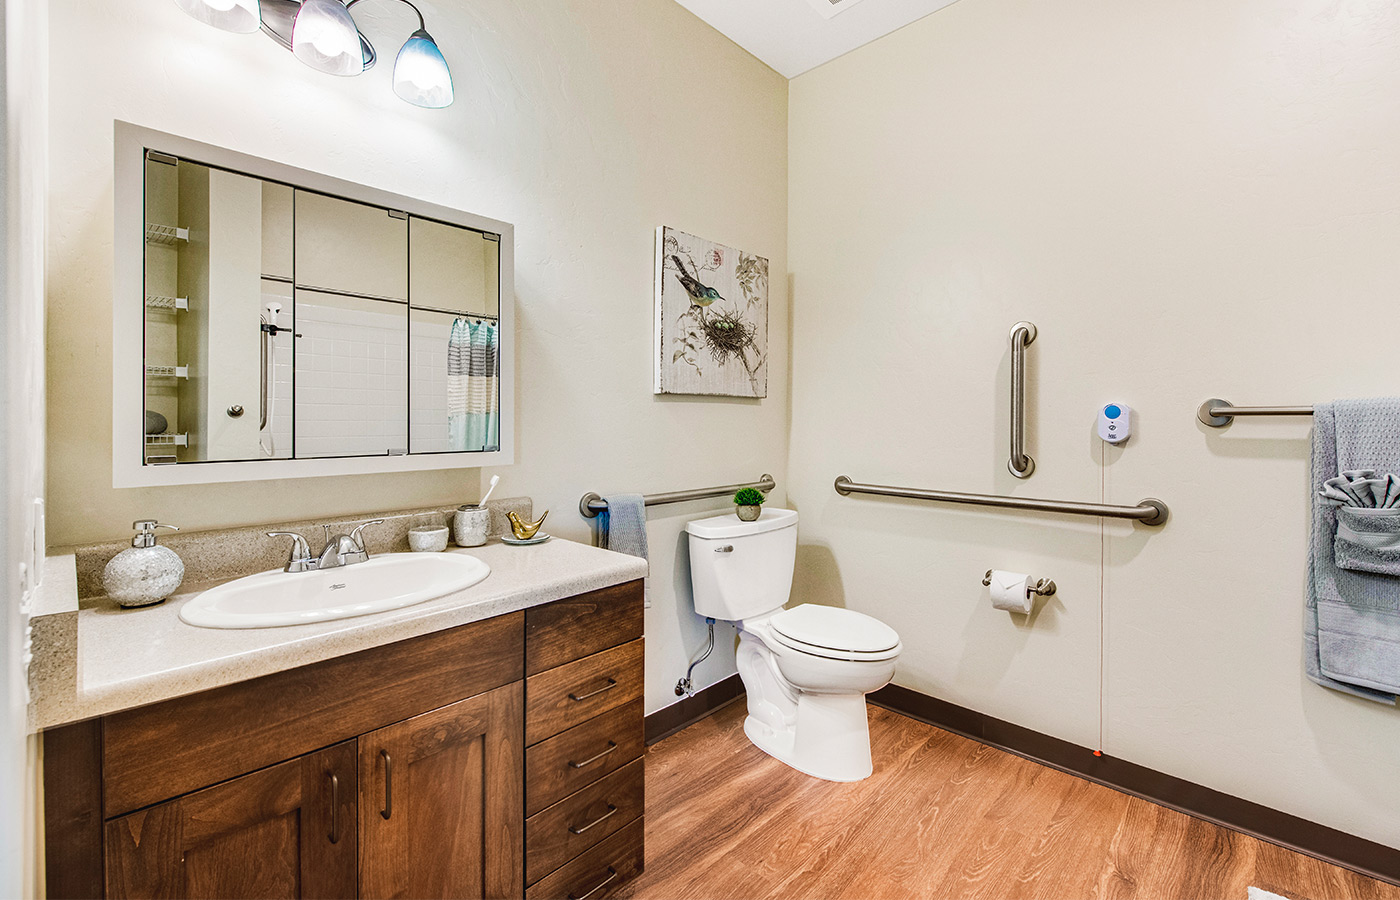 A bathroom in an apartment at The Watermark at Continental Ranch.